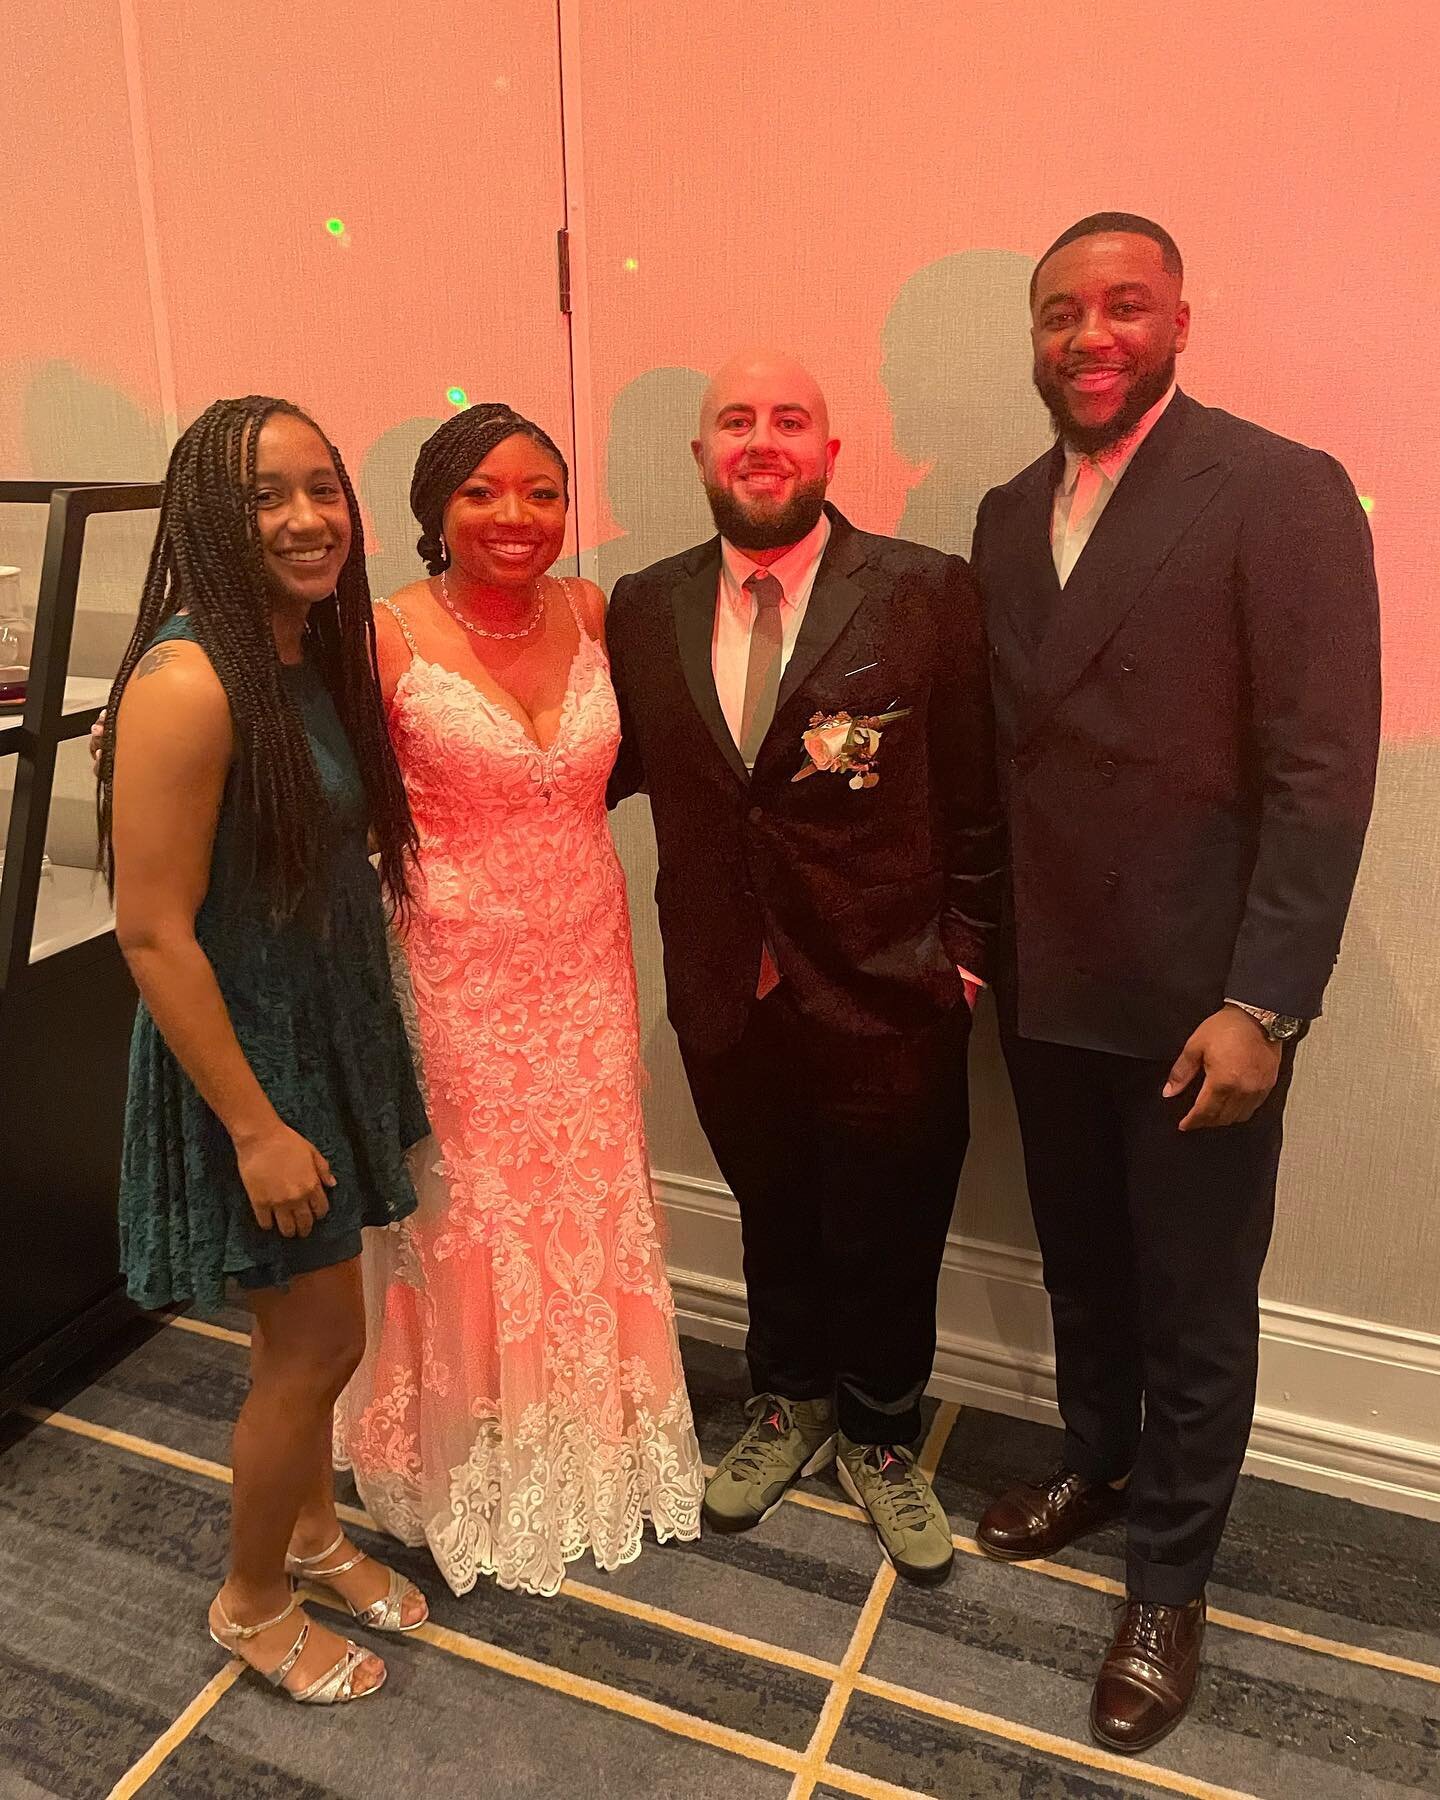 Well, here are my kids 😂. I look like a proud father. But really though, @allieish &amp; @mindofmacgregor wedding was beautiful. Happy to witness their union and love. Best wishes to the MacGregors on their new journey together.

Side note: in true 